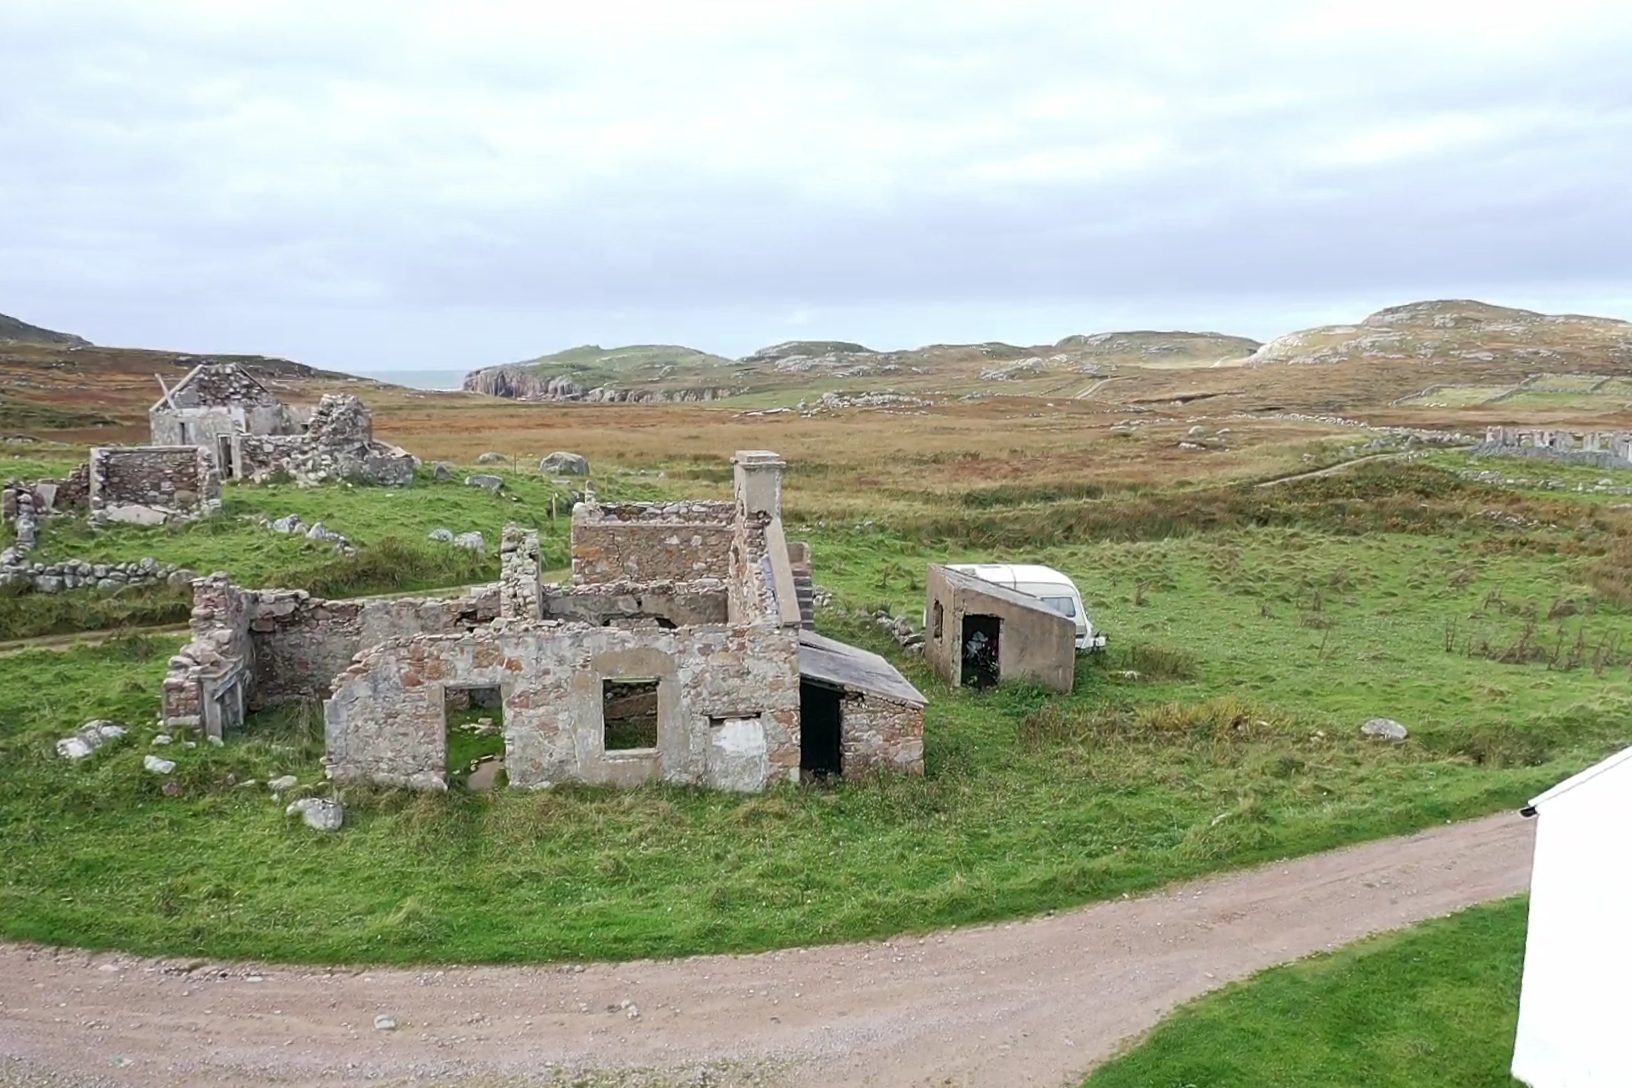 Gola Island – Site with old ruins.